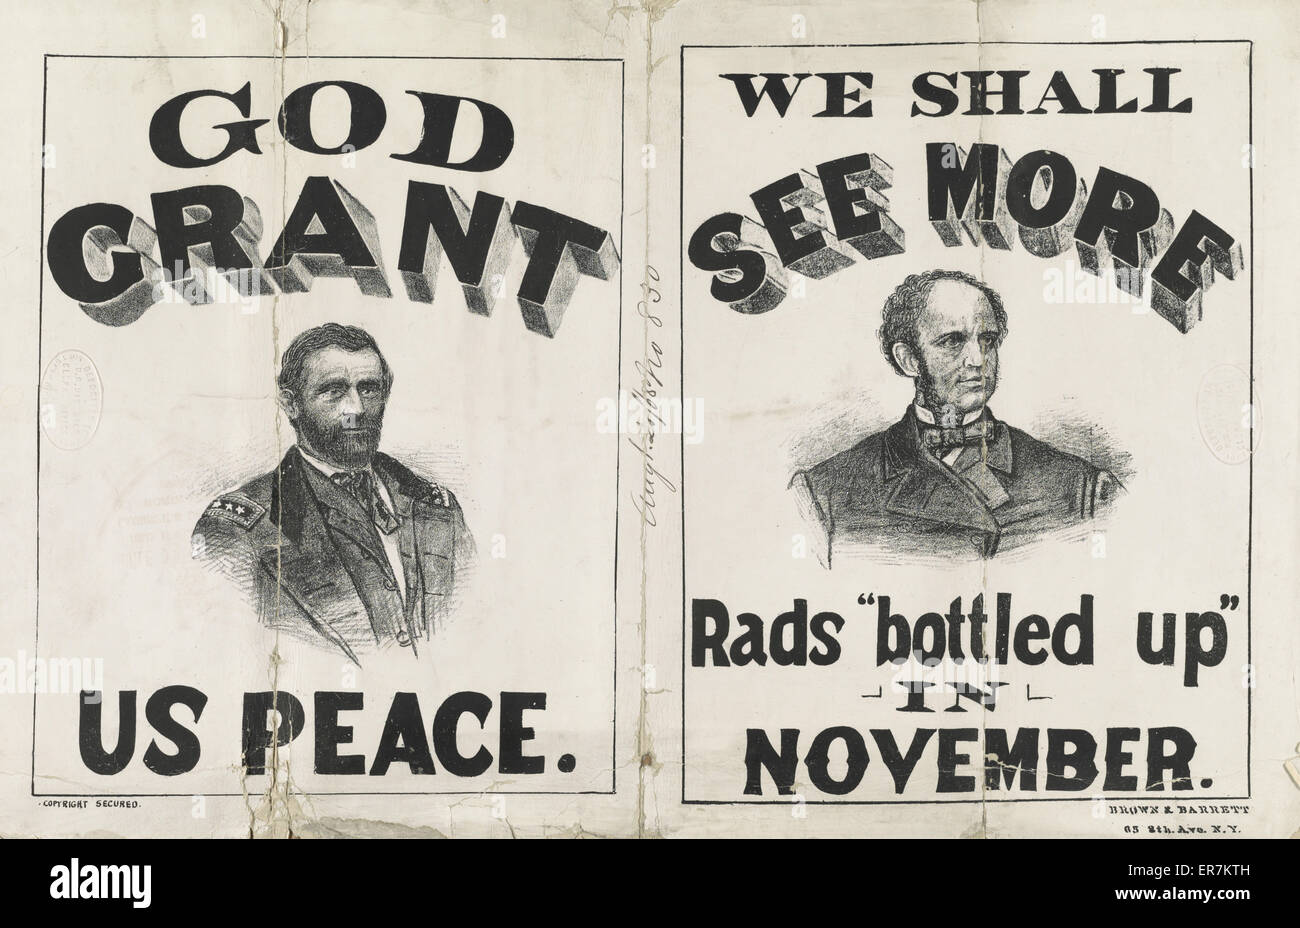 God grant us peace We shall see more Rads bottled up in November. A double campaign placard or sign. The work may be an uncut proof for two placards, produced for both Republican and Democratic camps during the 1868 campaign. It is unclear whether the Gra Stock Photo